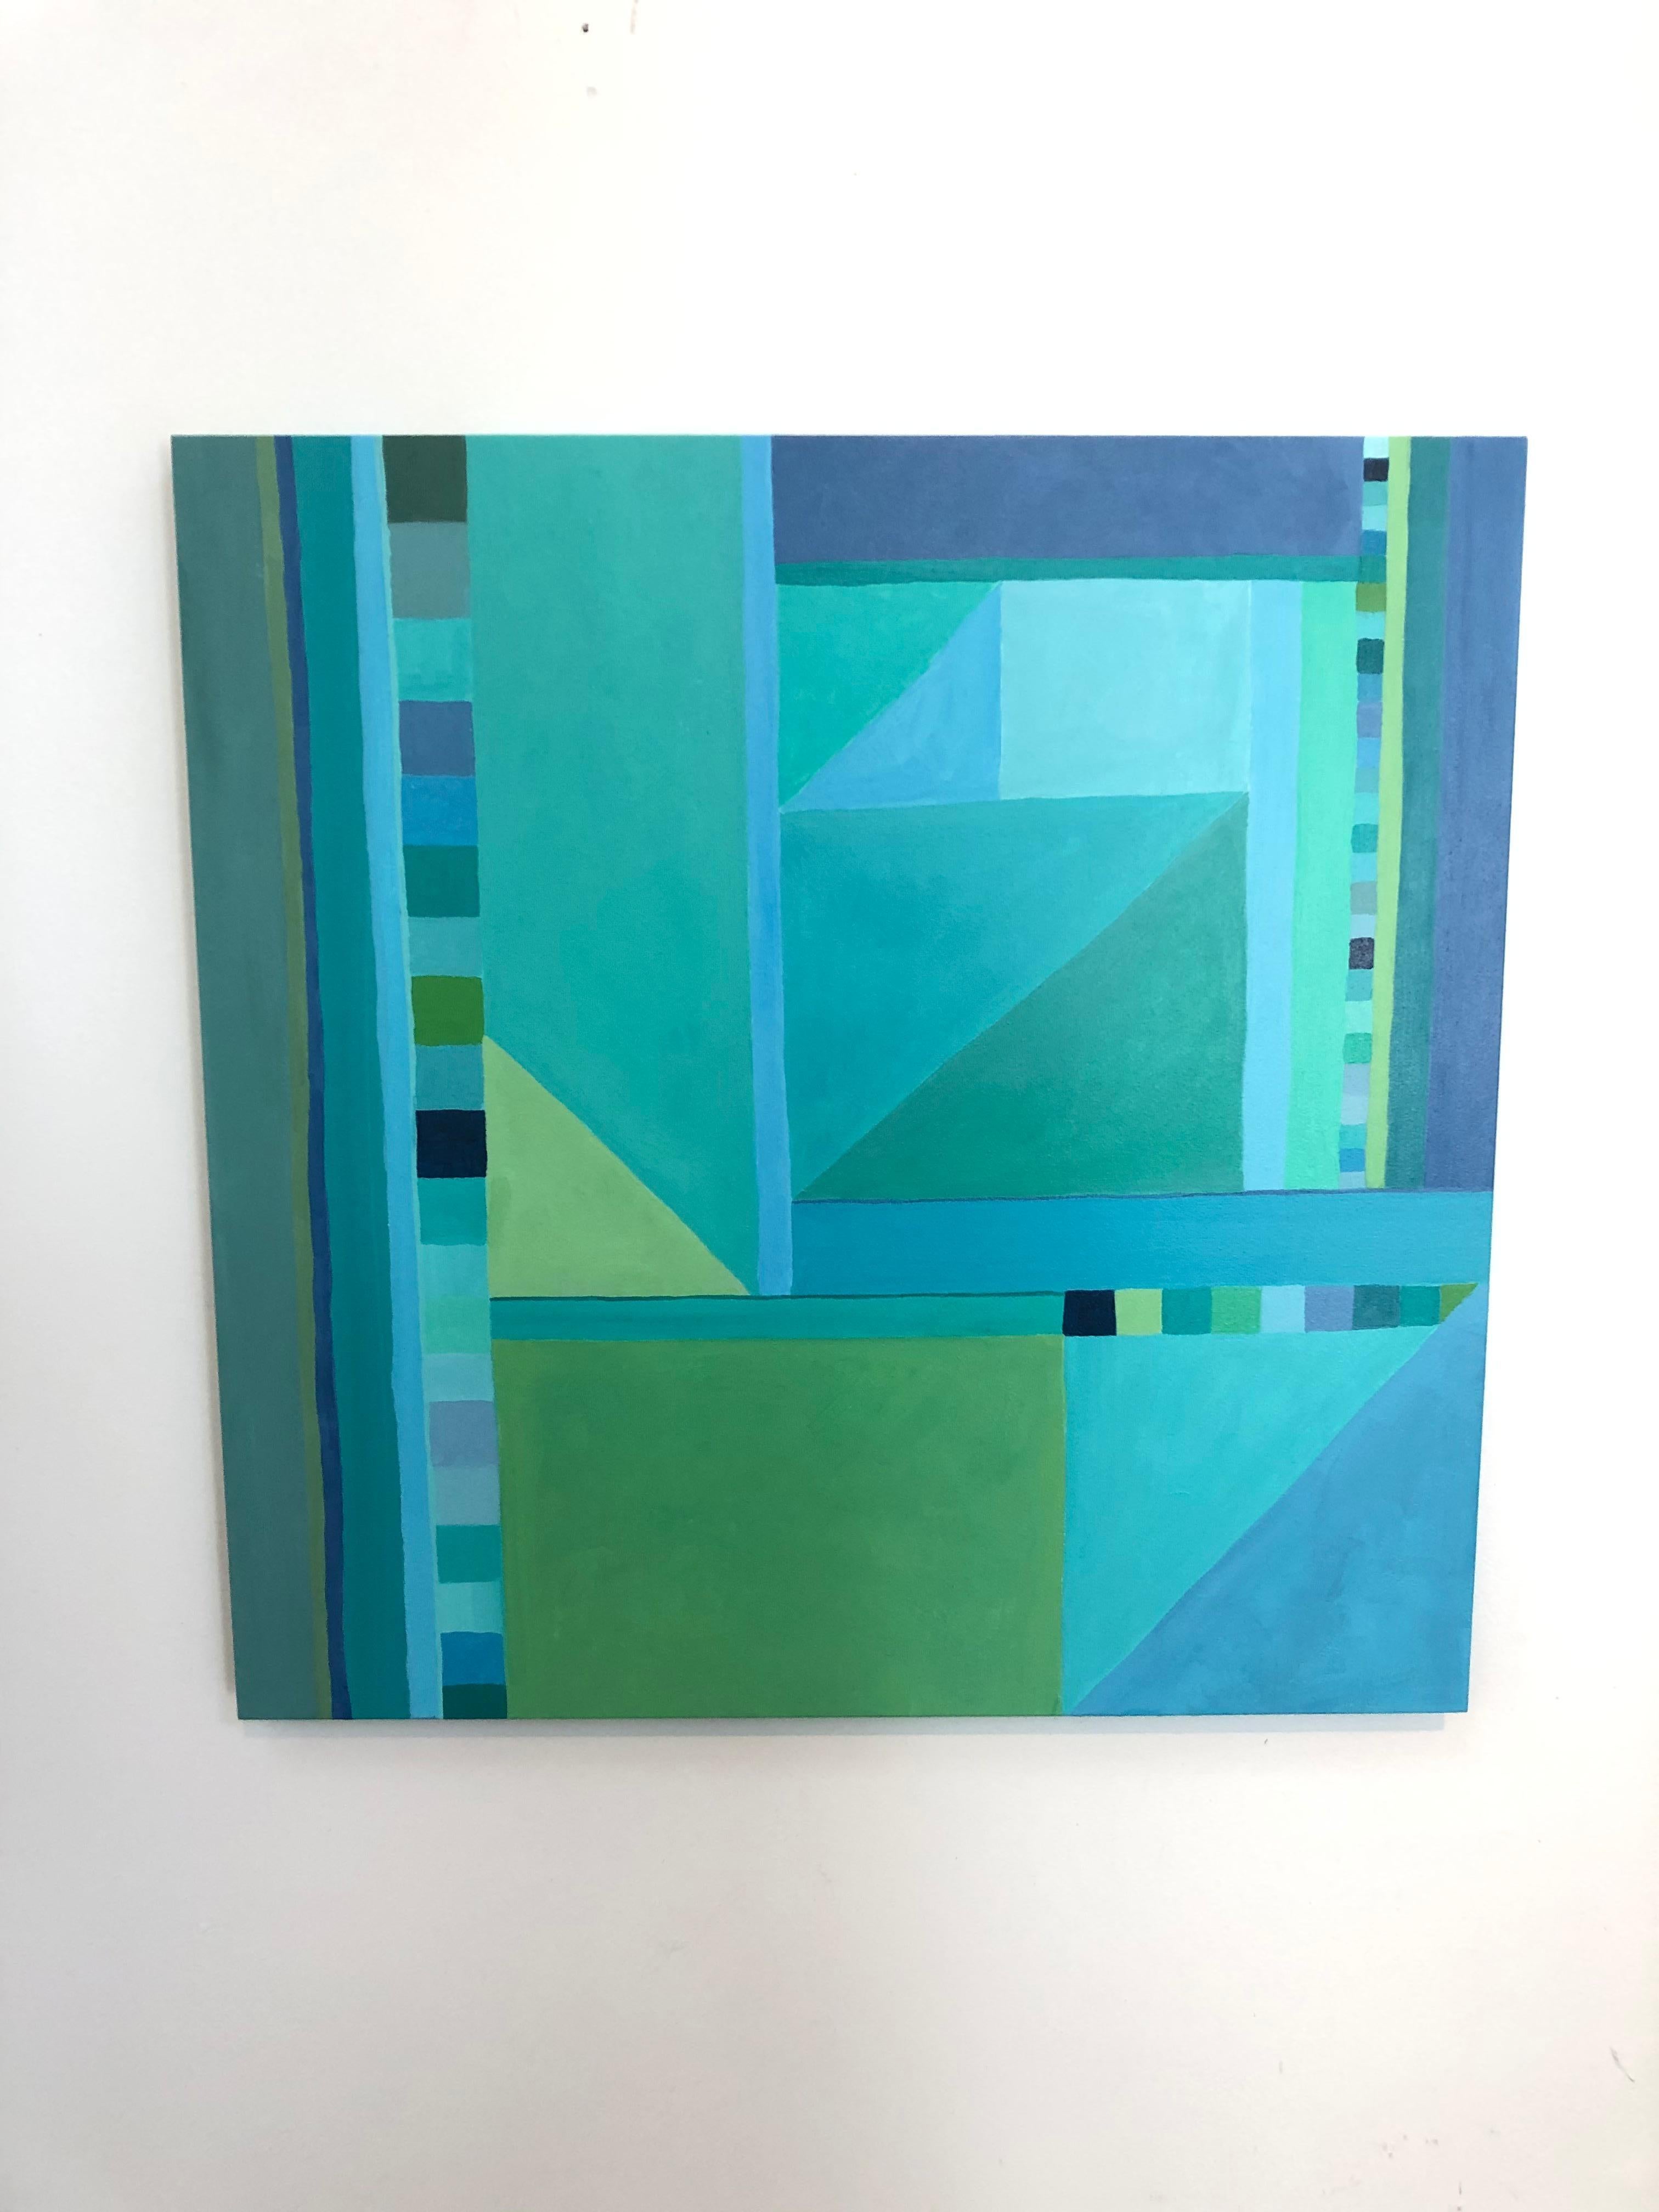 A striking geometric abstract painting with squares, lines, triangles and rectangles, in a soothing composition and color palette of blues and greens. Painted on sides so not intended to be framed.